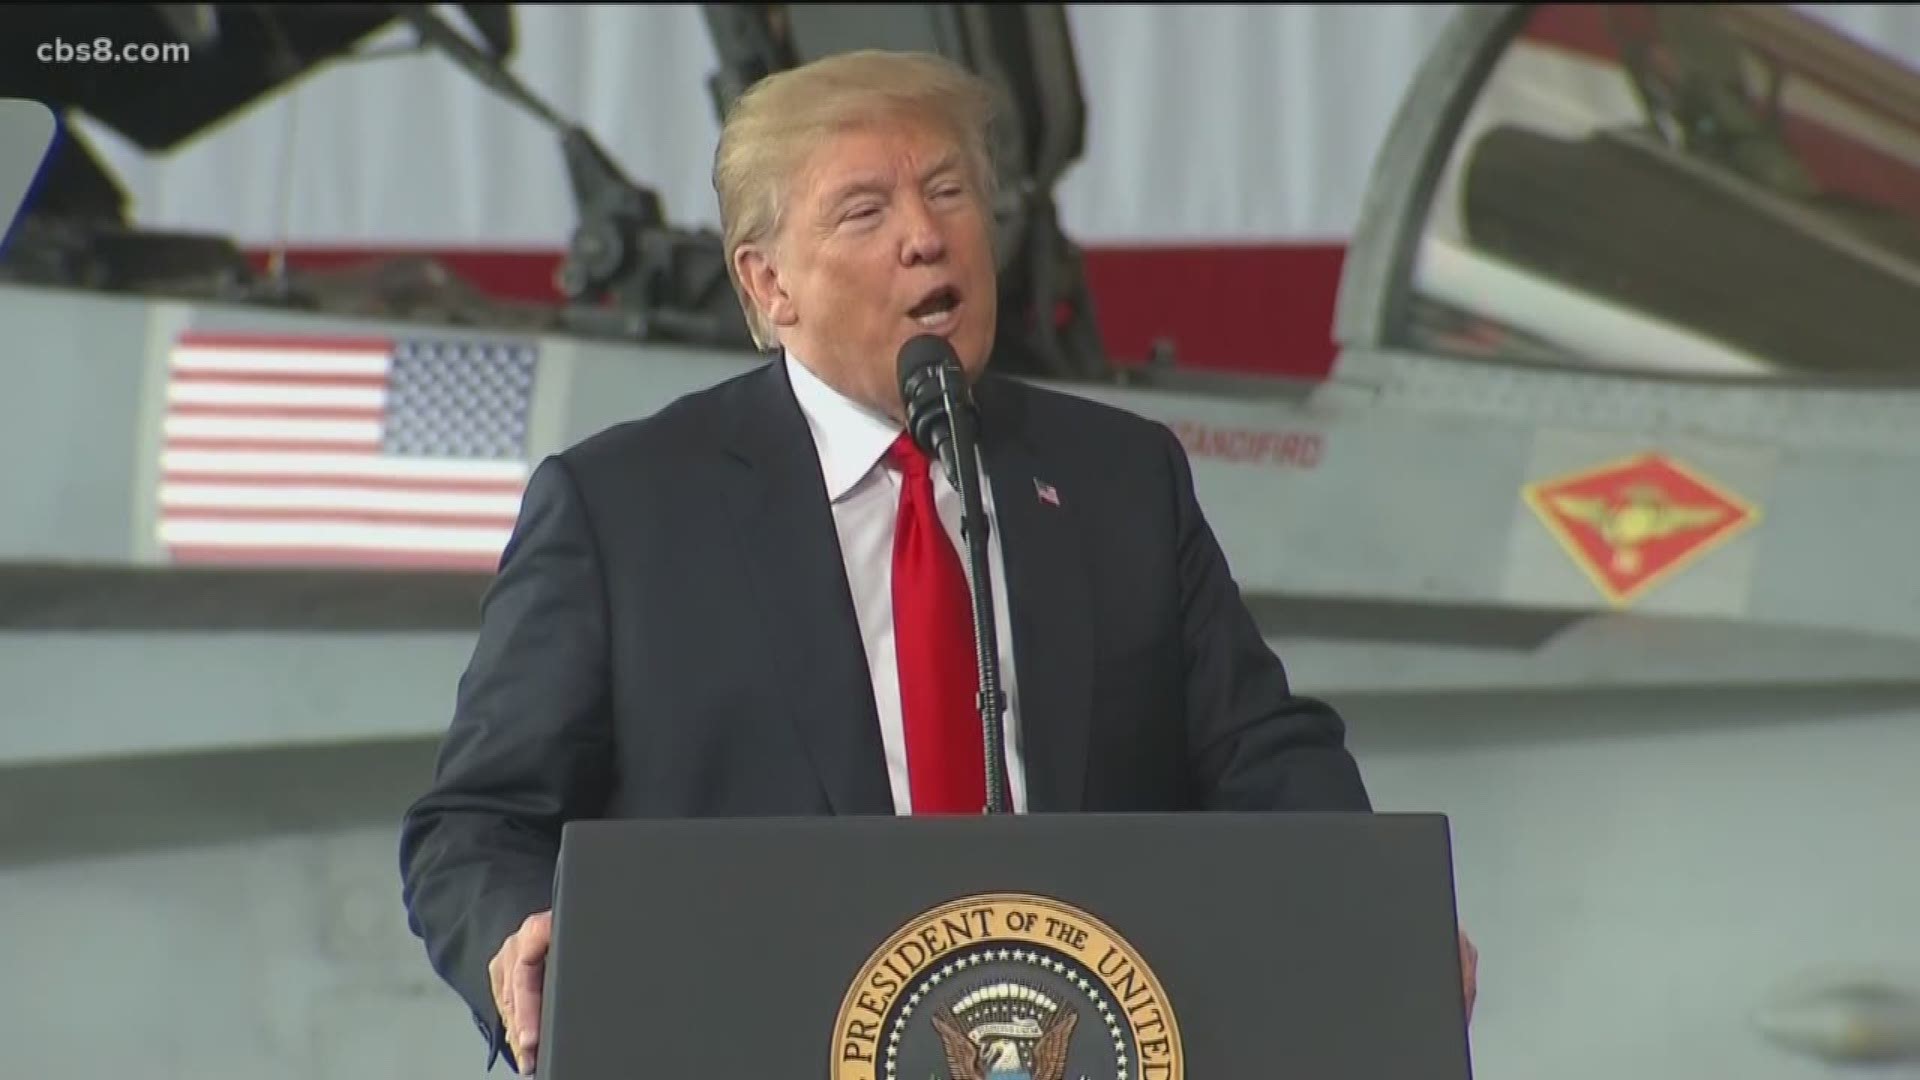 President Trump will return to California - this time to raise money for his re-election campaign.